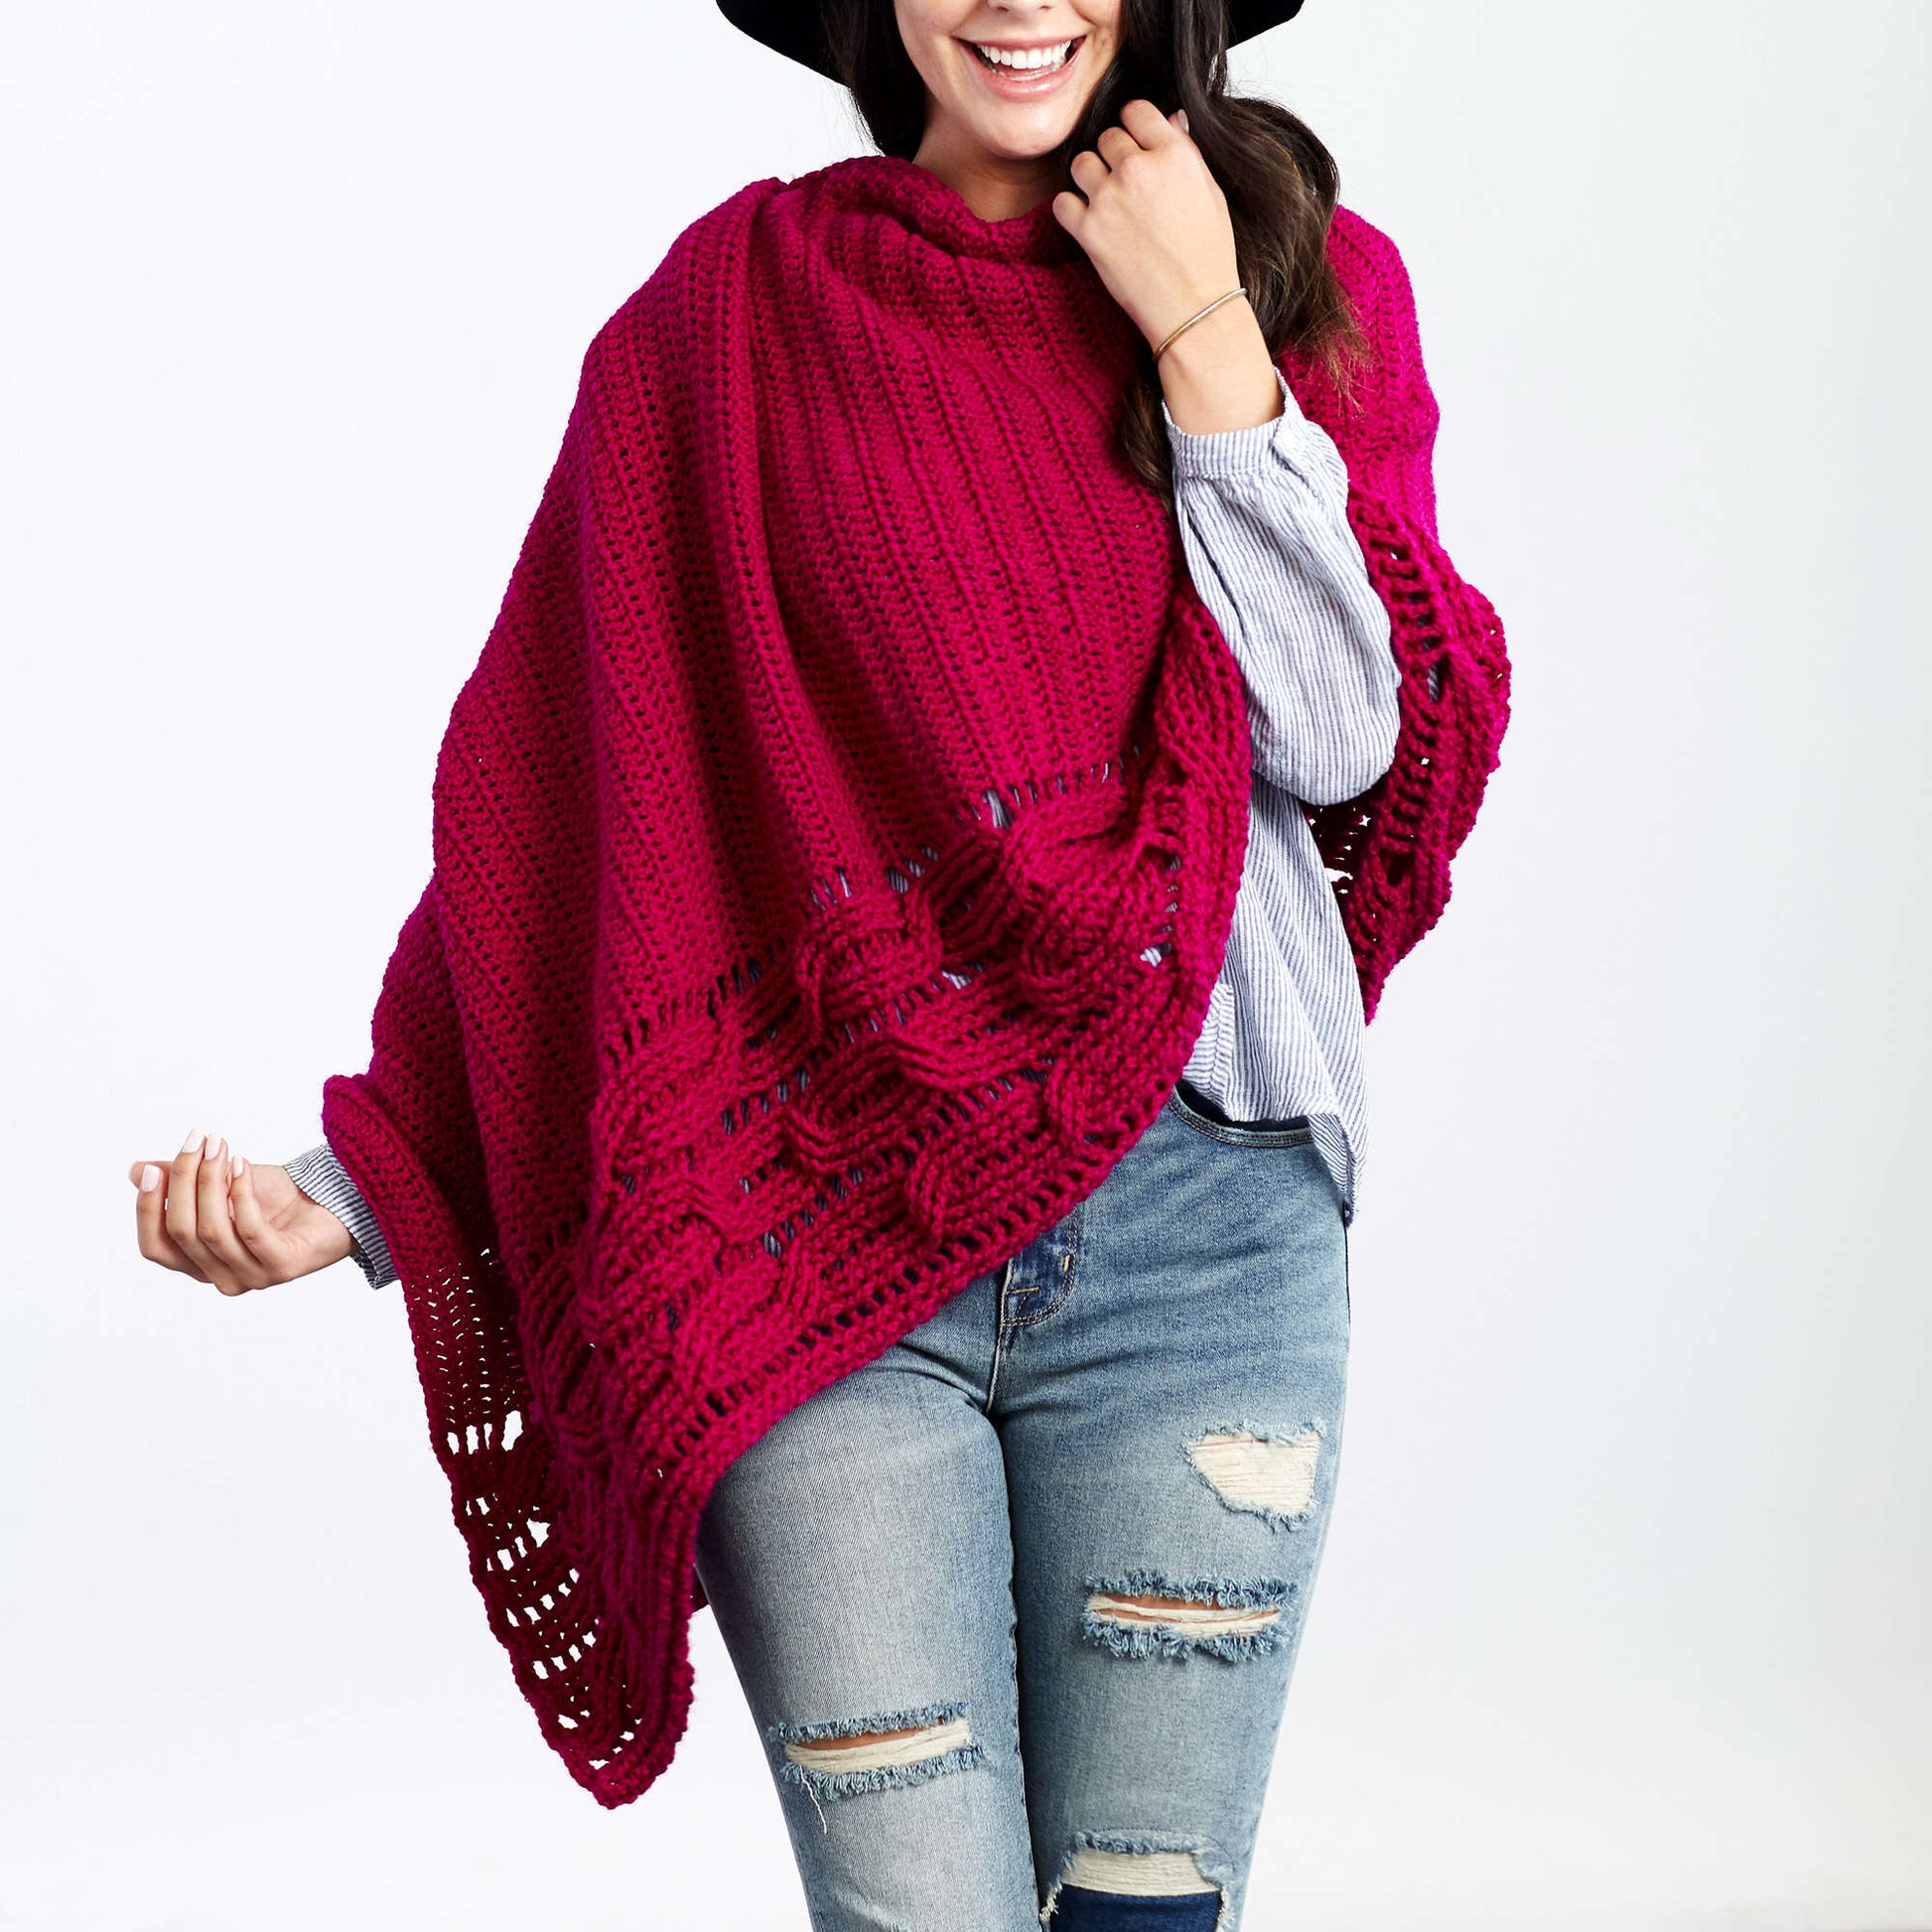 Free Red Heart Crochet Interwoven Cabled Chic Shawl Pattern